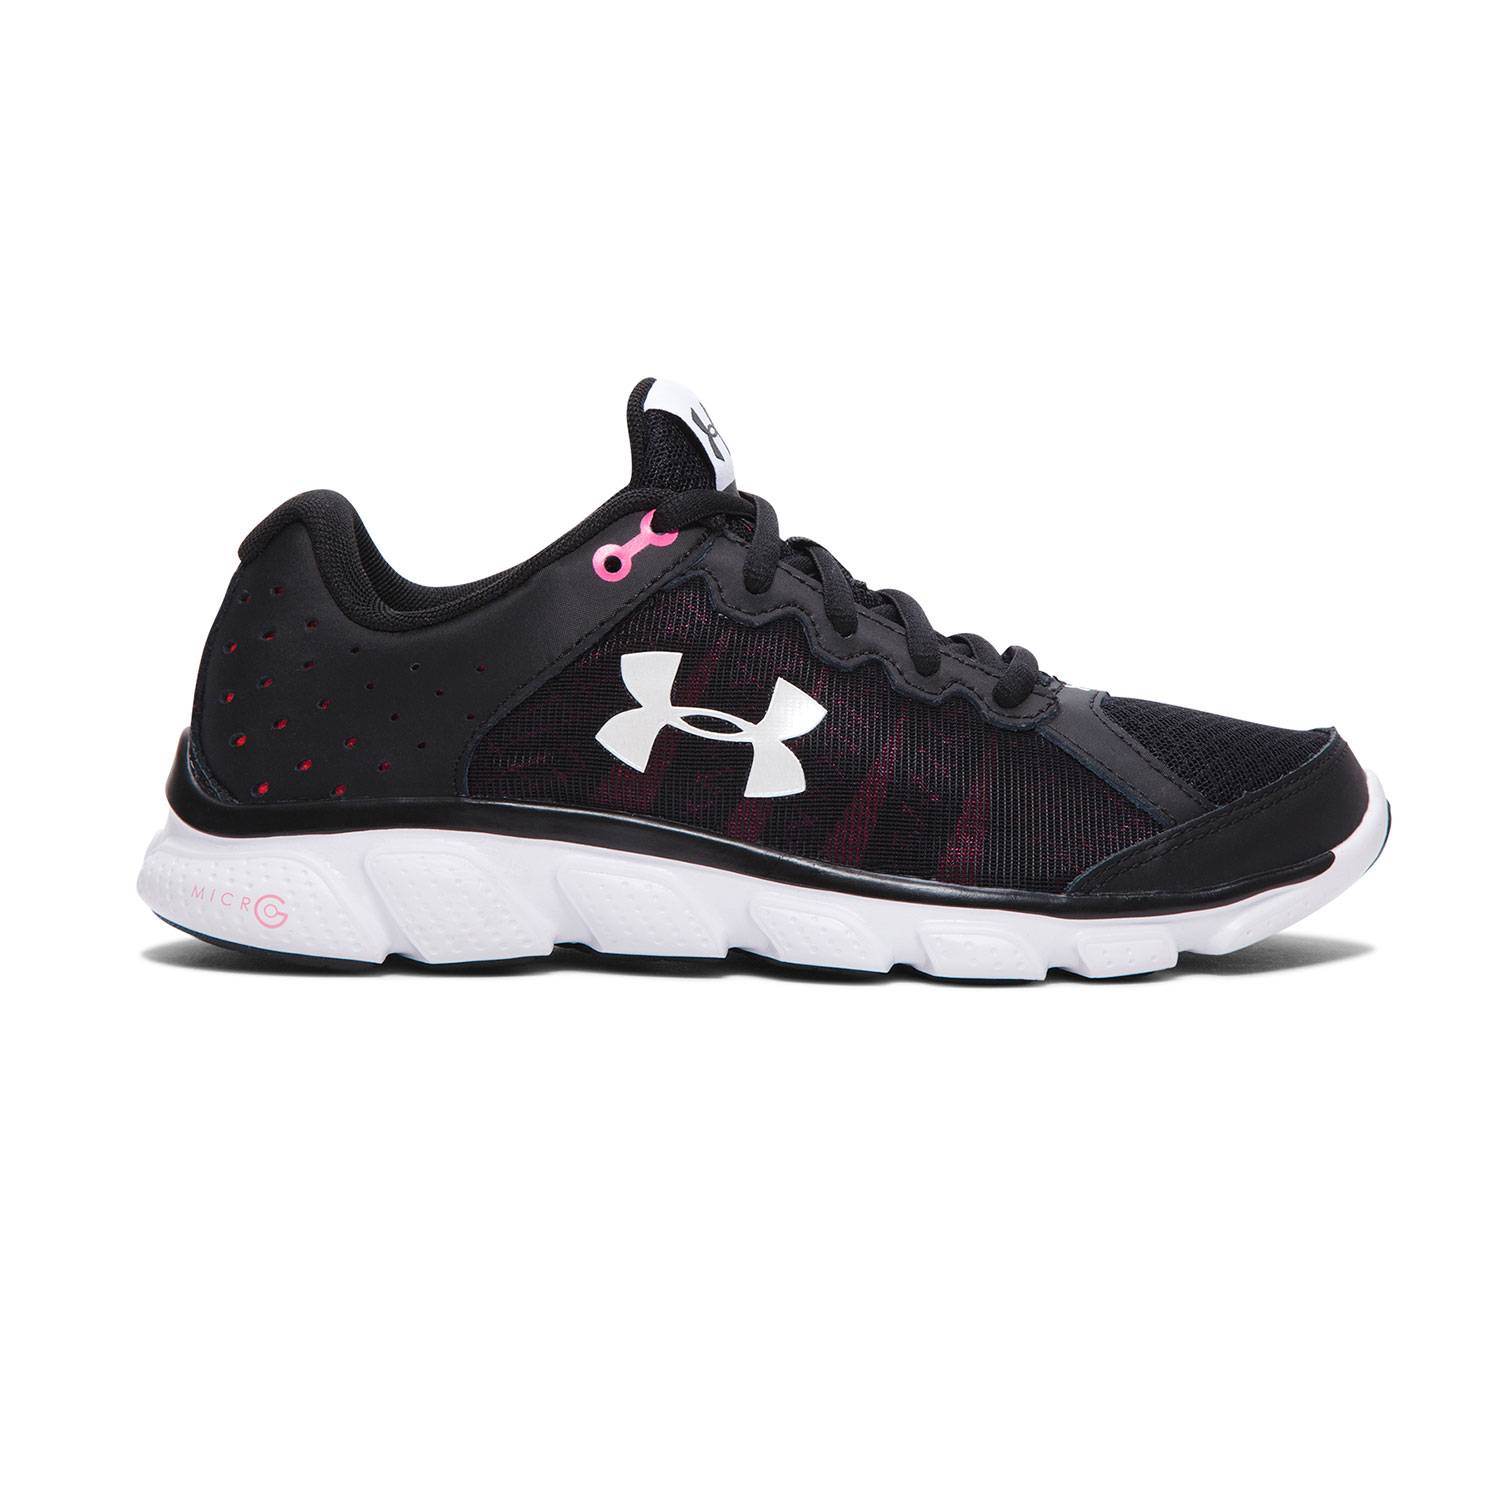 under armour micro g women's running shoes